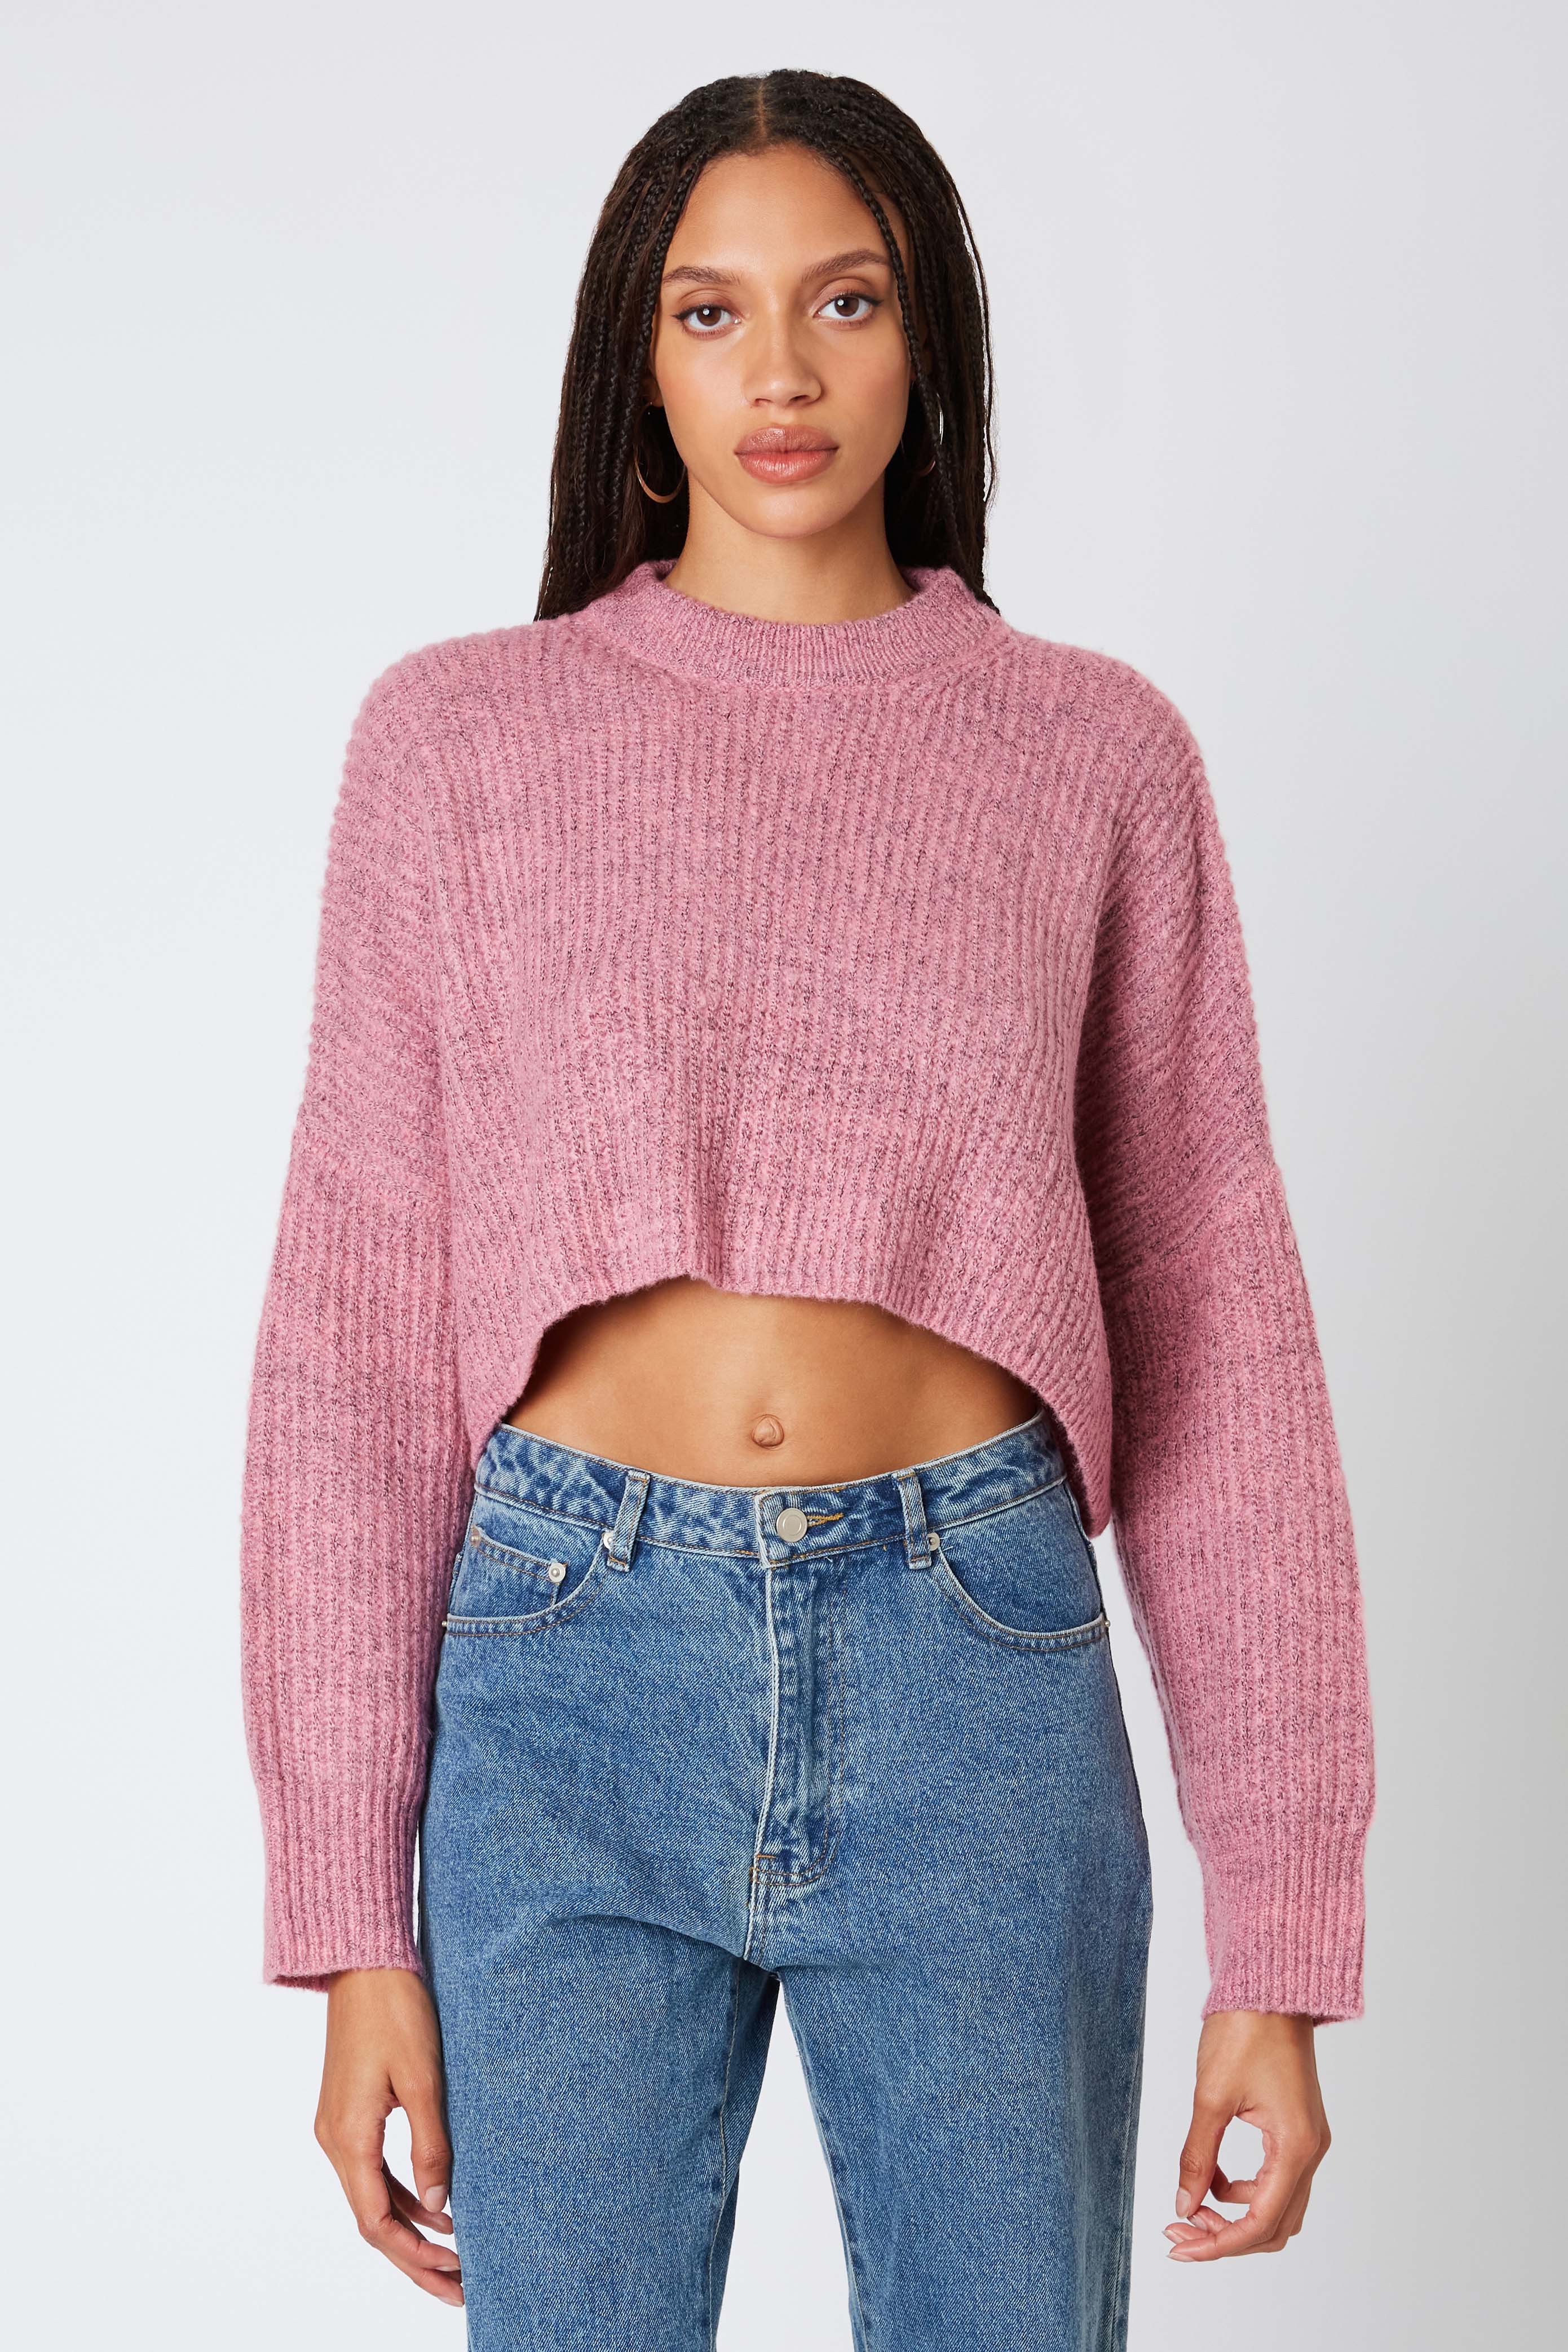 Cropped Mockneck Sweater in Pink Front View